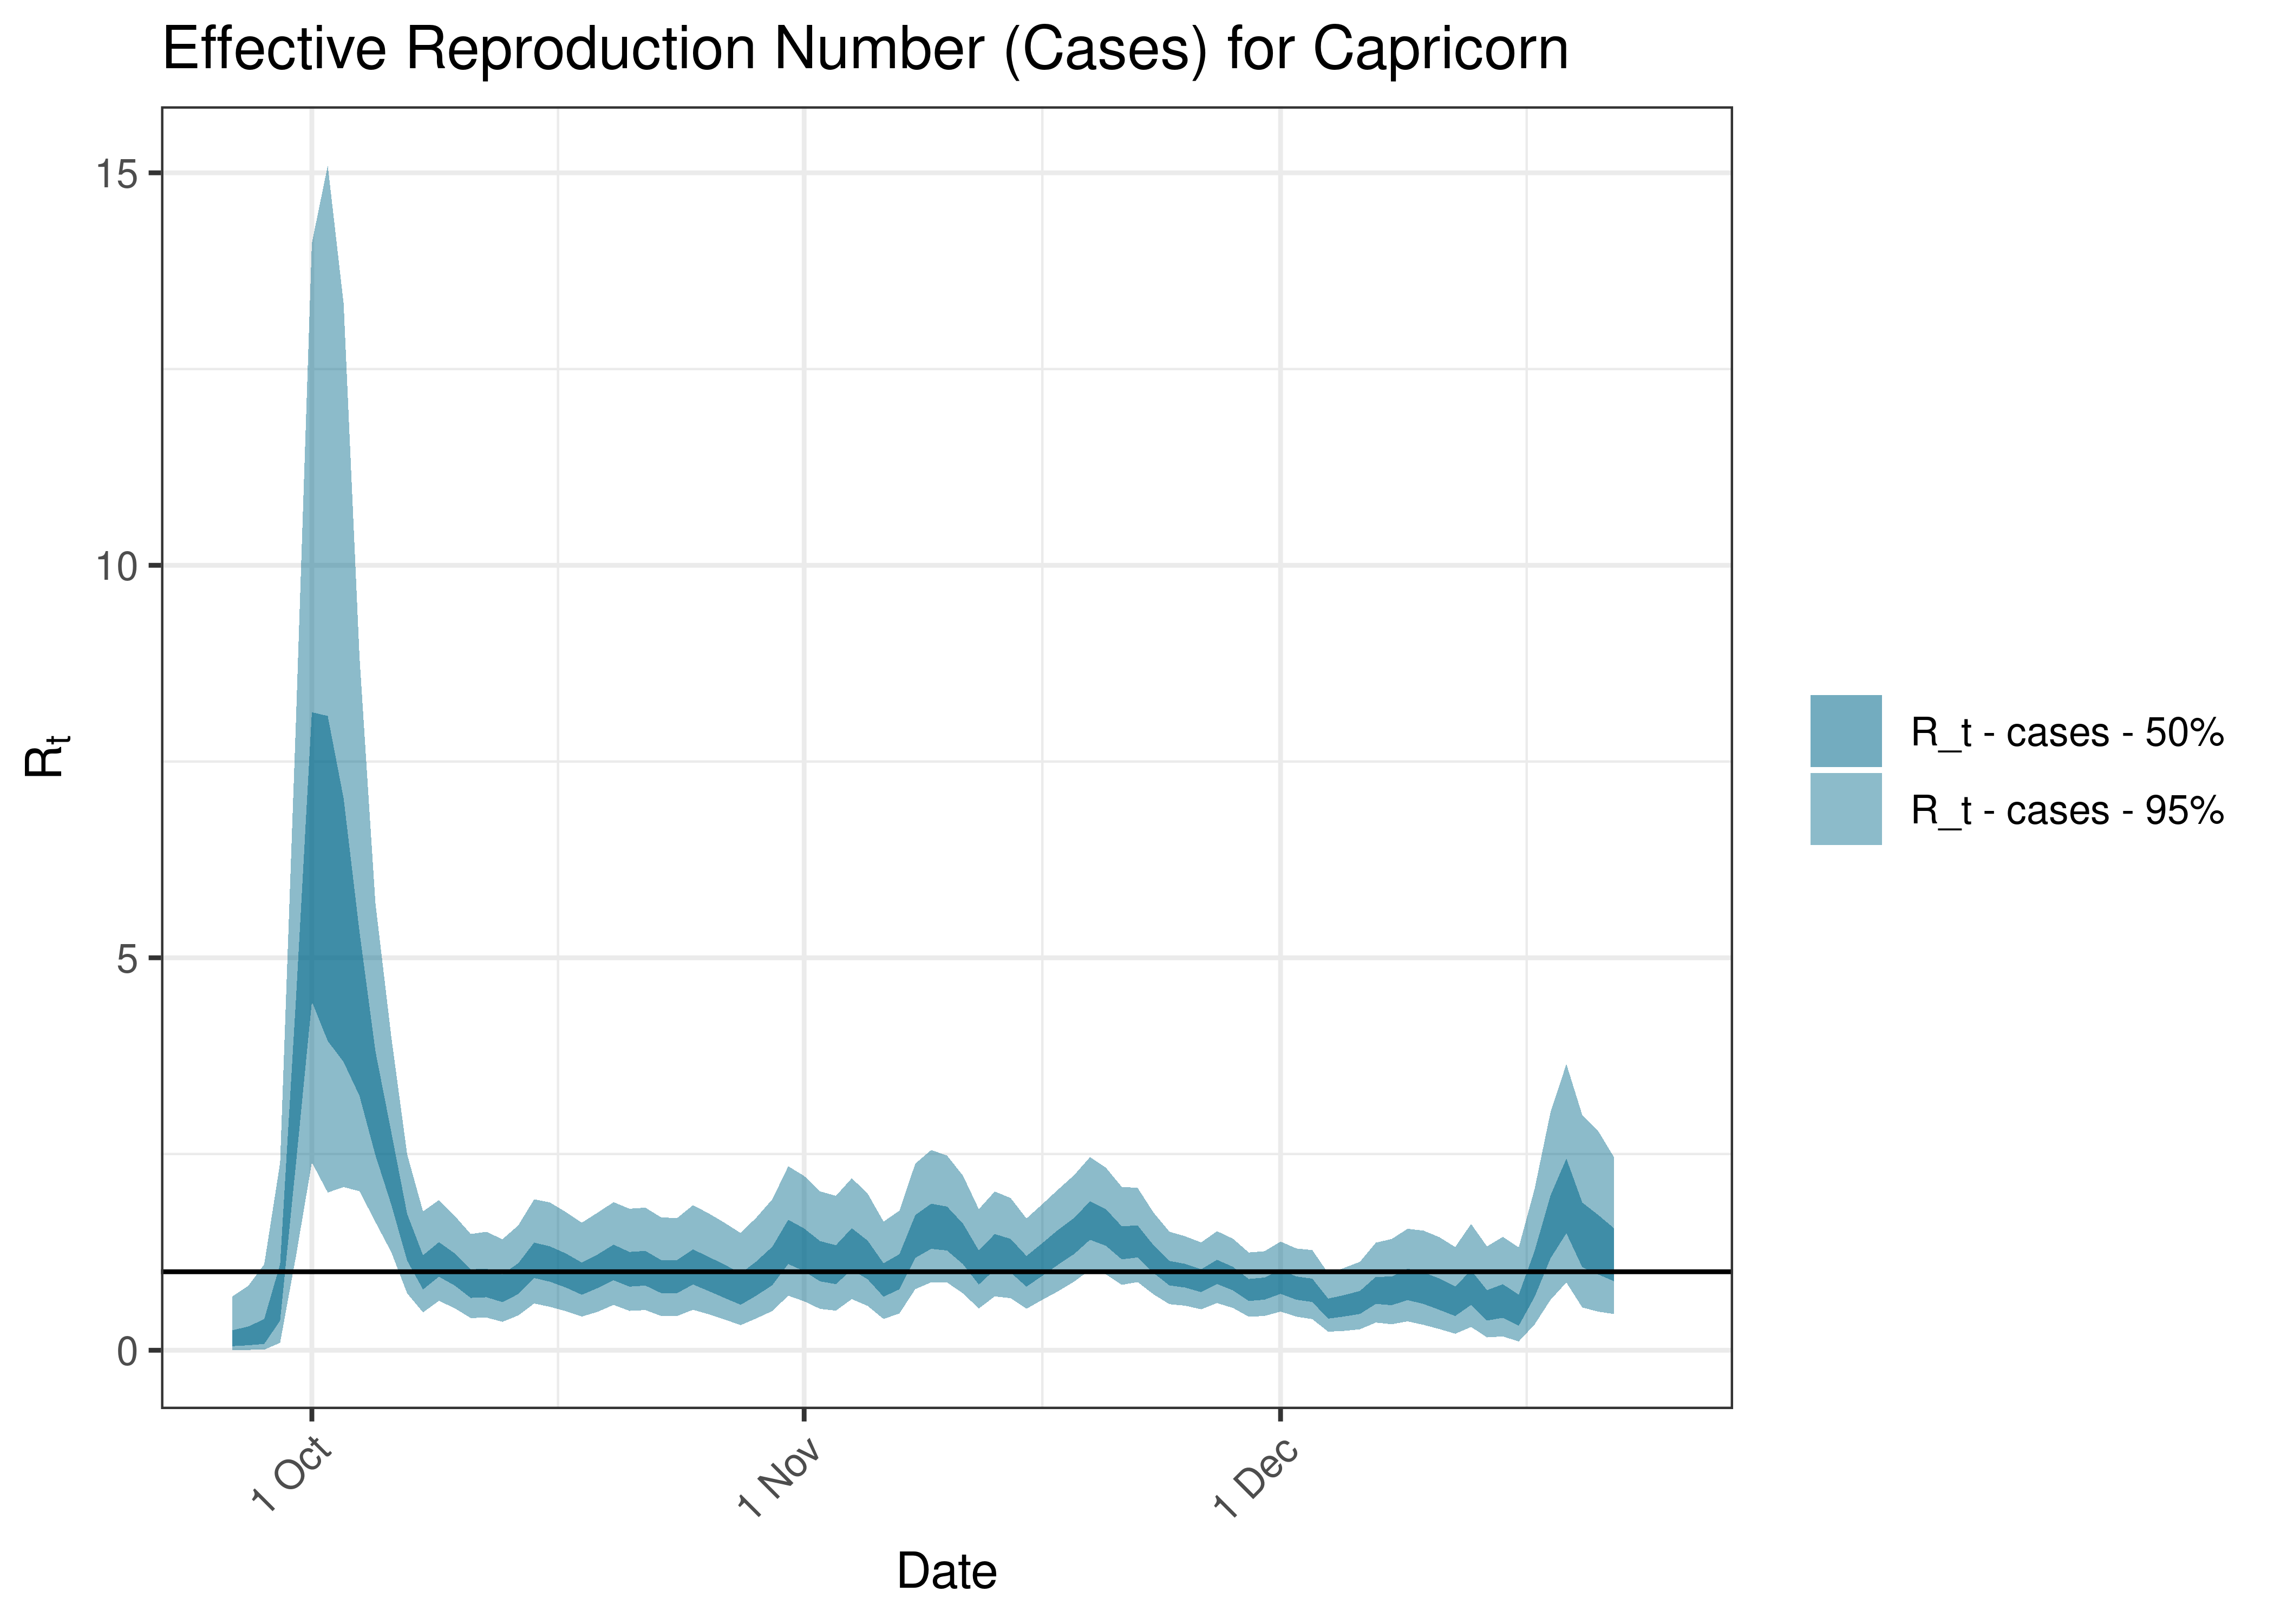 Estimated Effective Reproduction Number Based on Cases for Capricorn over last 90 days